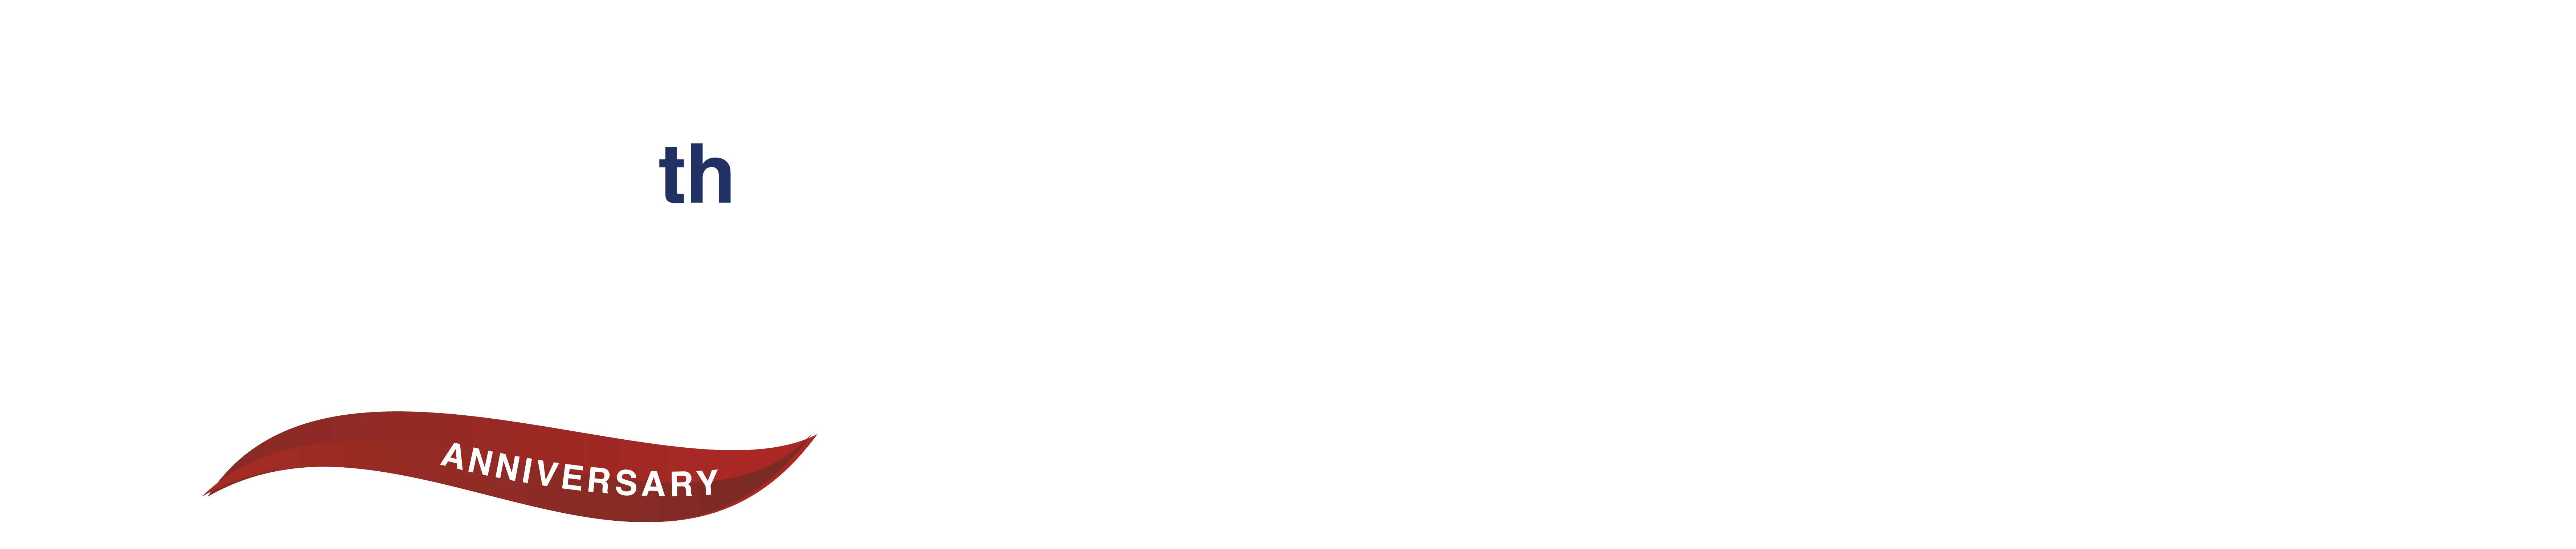 Makinex 20th Anniversary logo Concept 1-02-cropped